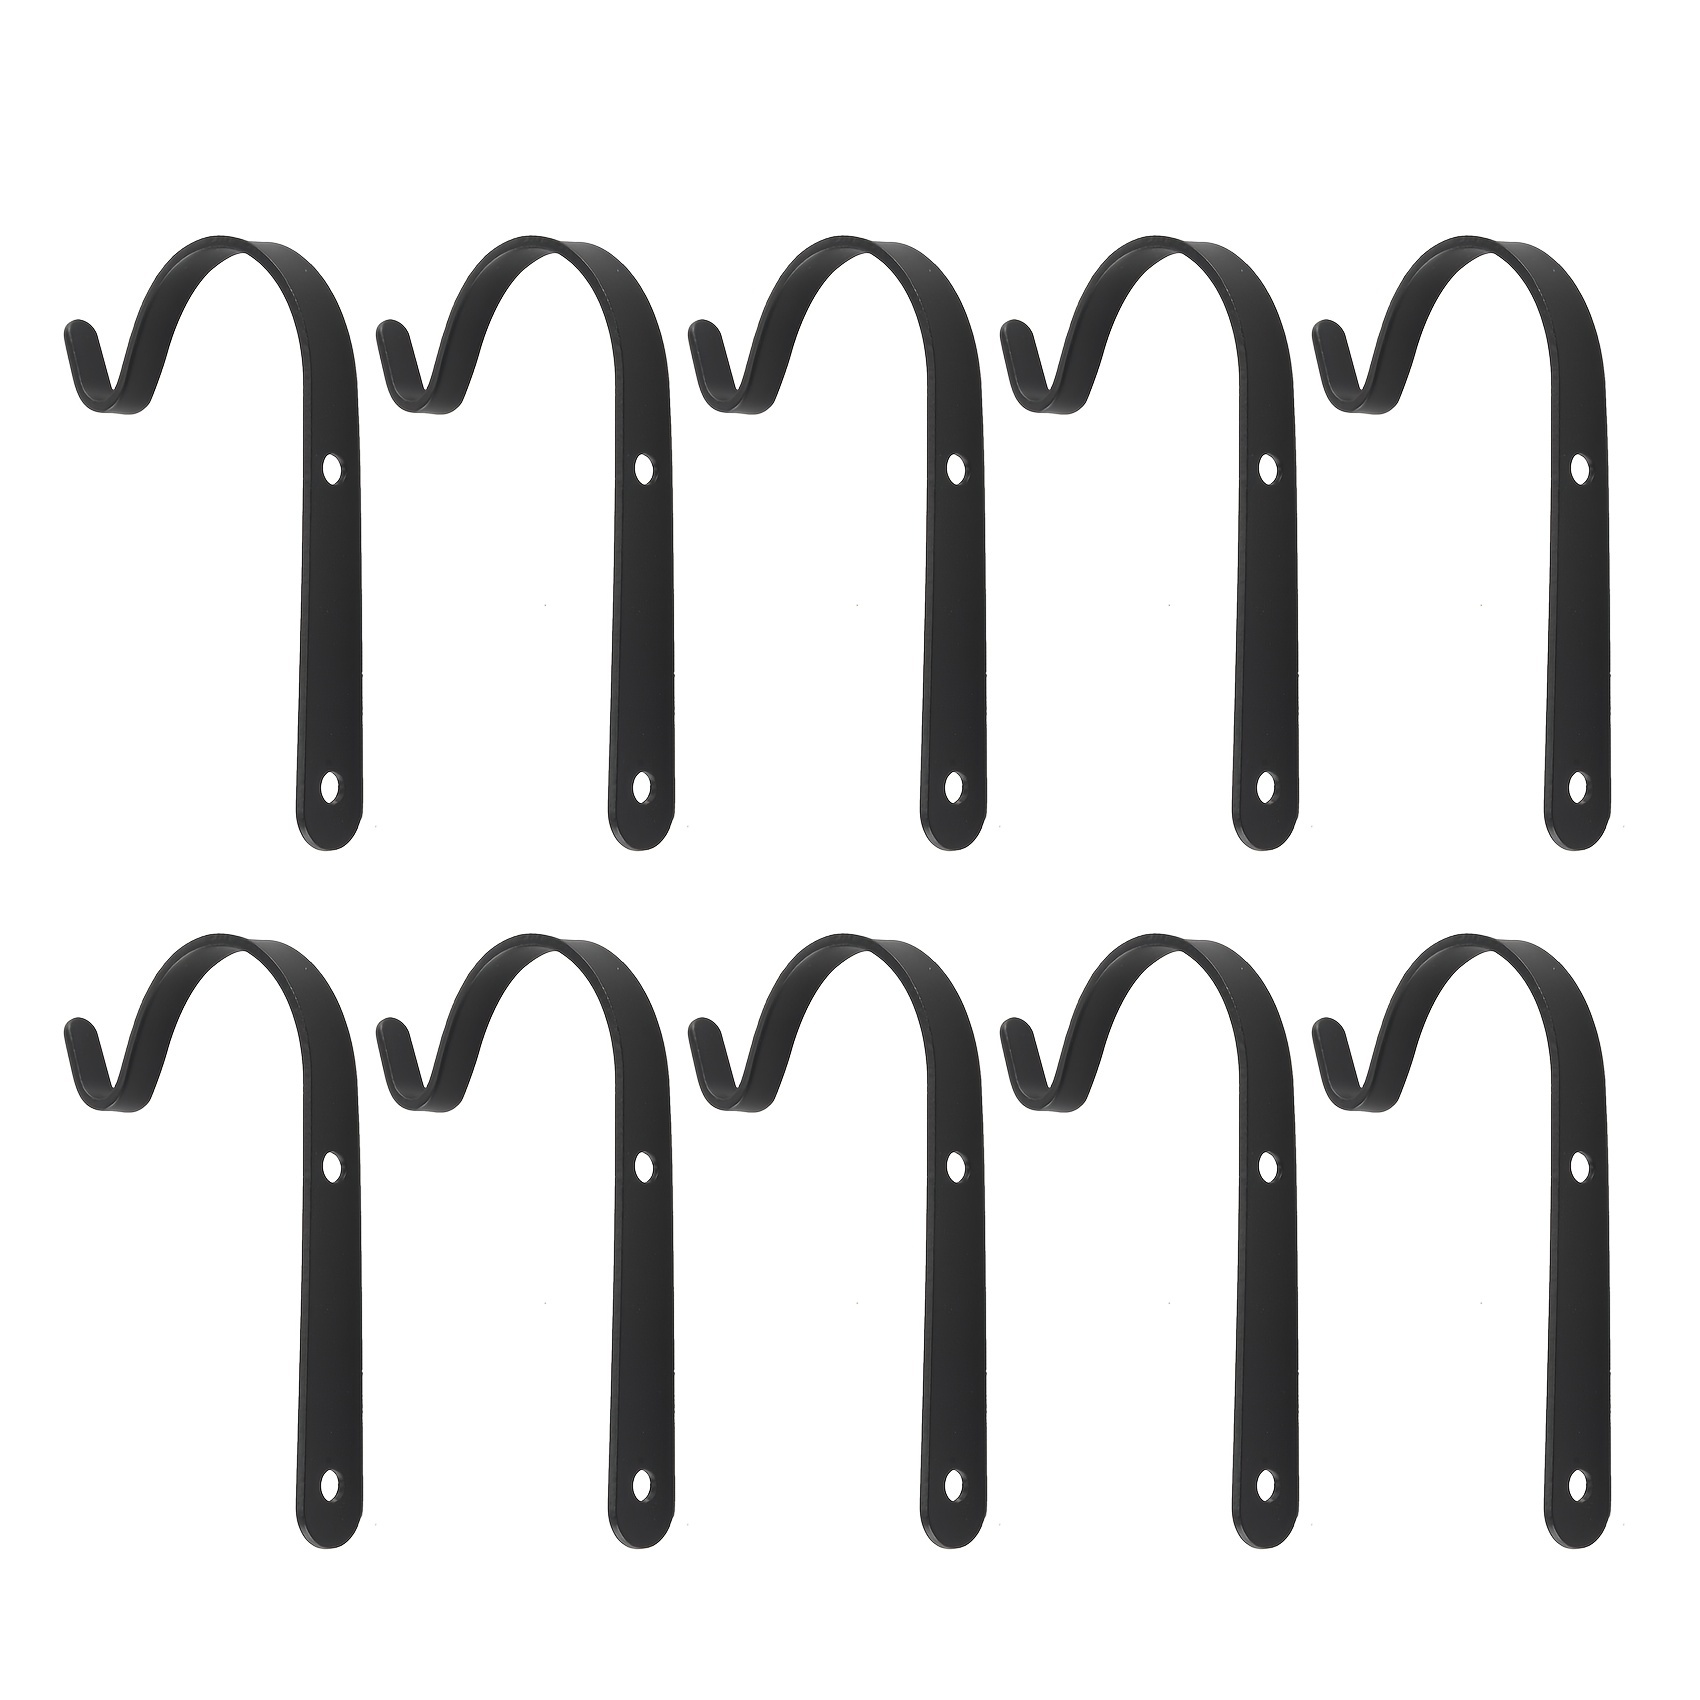 10pcs Black Iron Wall Hanging Hooks Heavy Duty Basket Brackets Strong Wall Mounted Storage Hooks For Outside Garden Decorations